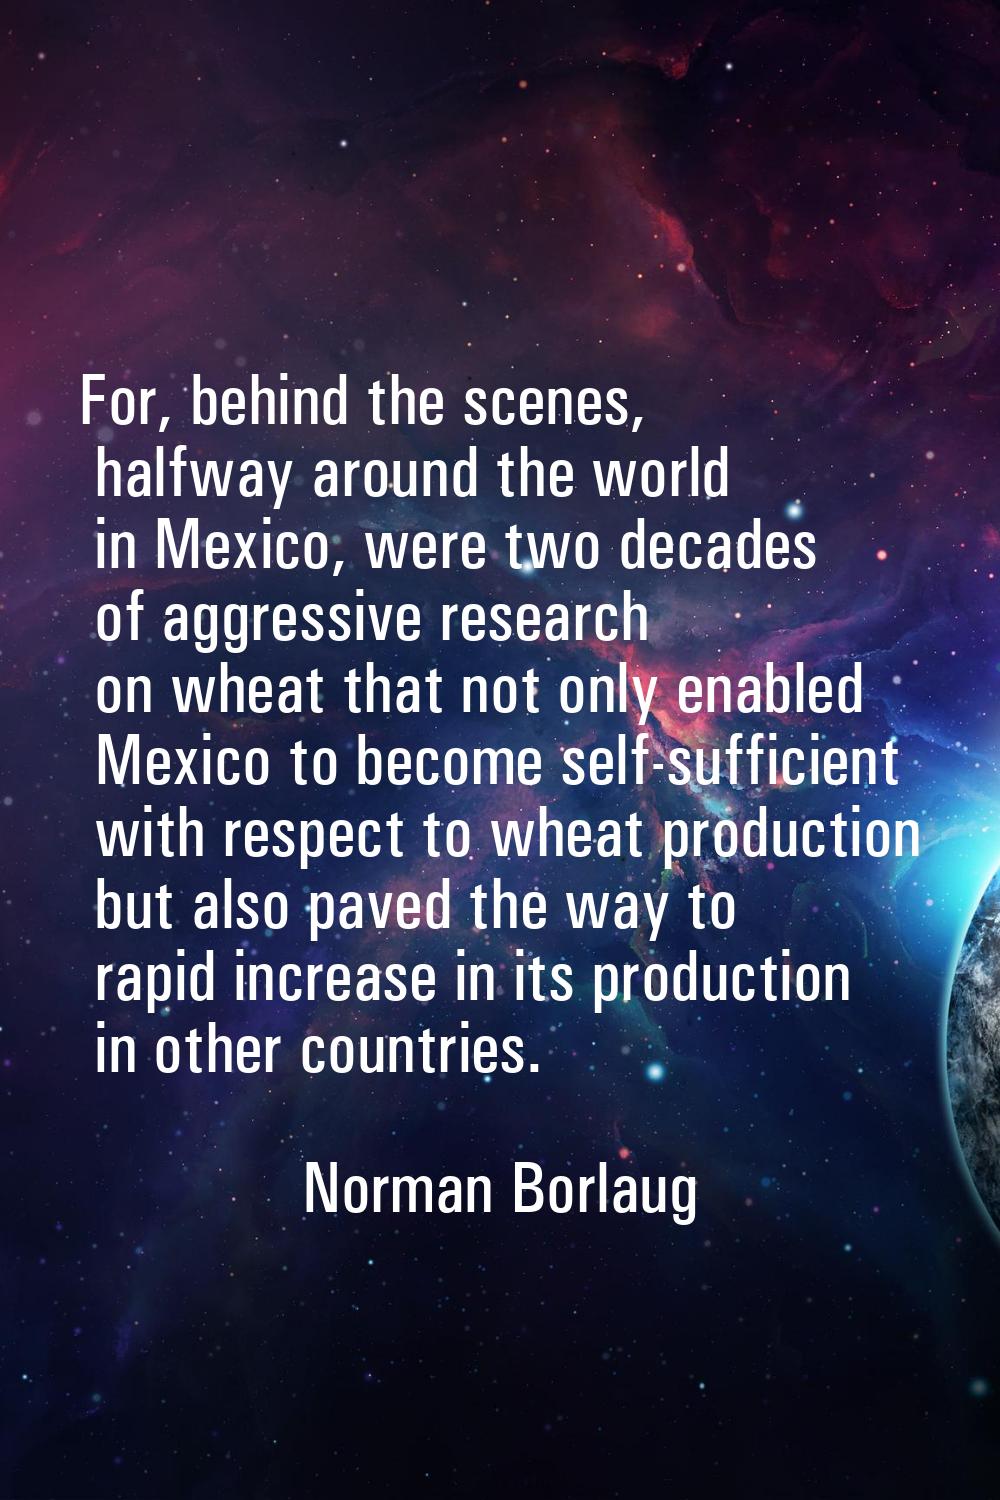 For, behind the scenes, halfway around the world in Mexico, were two decades of aggressive research